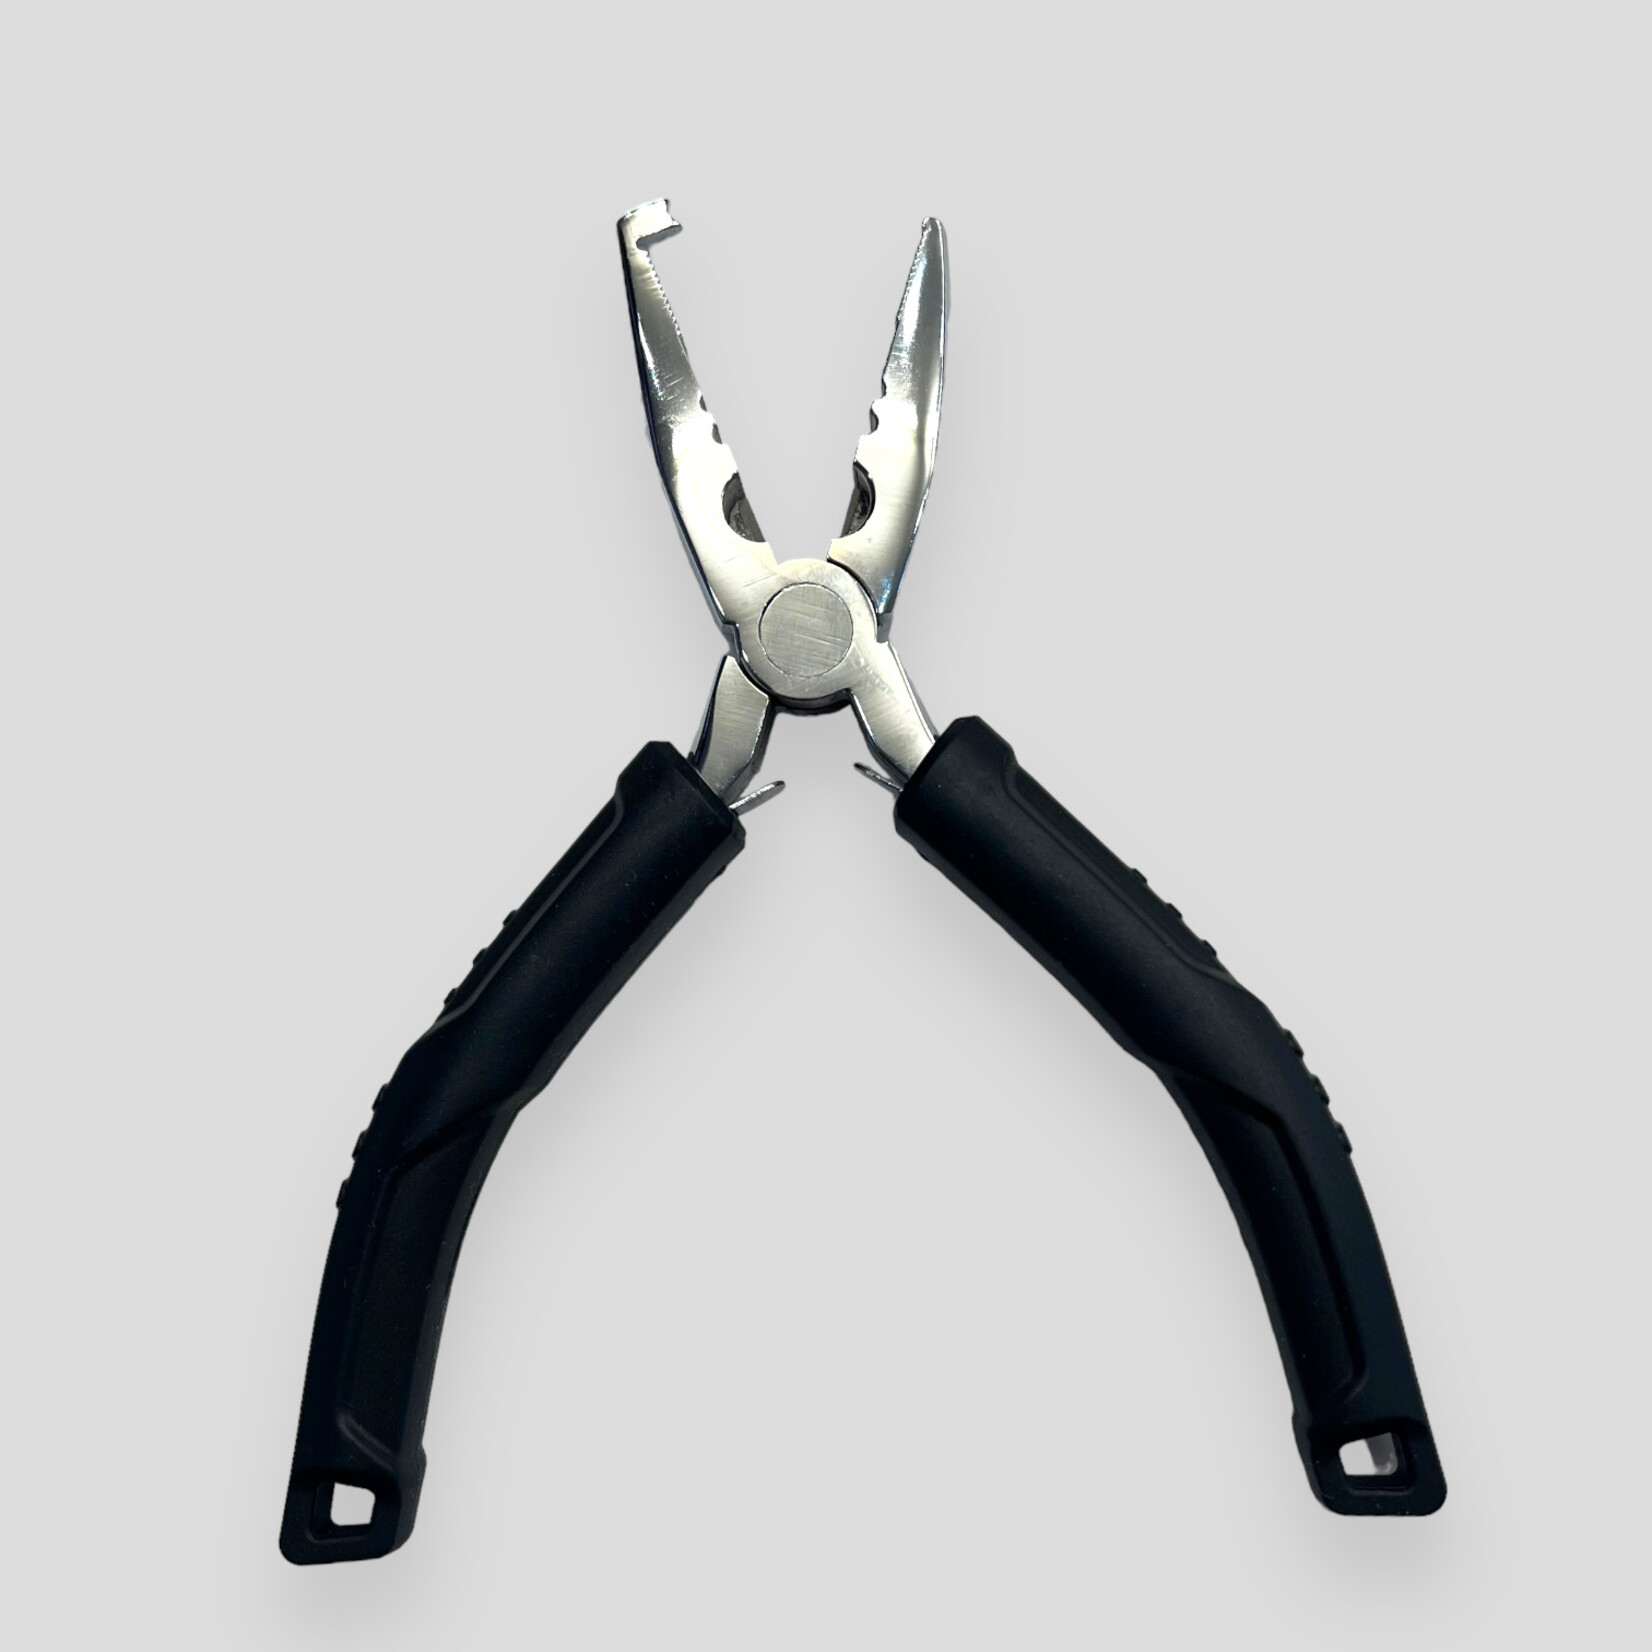 Outside Set Products Tunacious SS Pliers